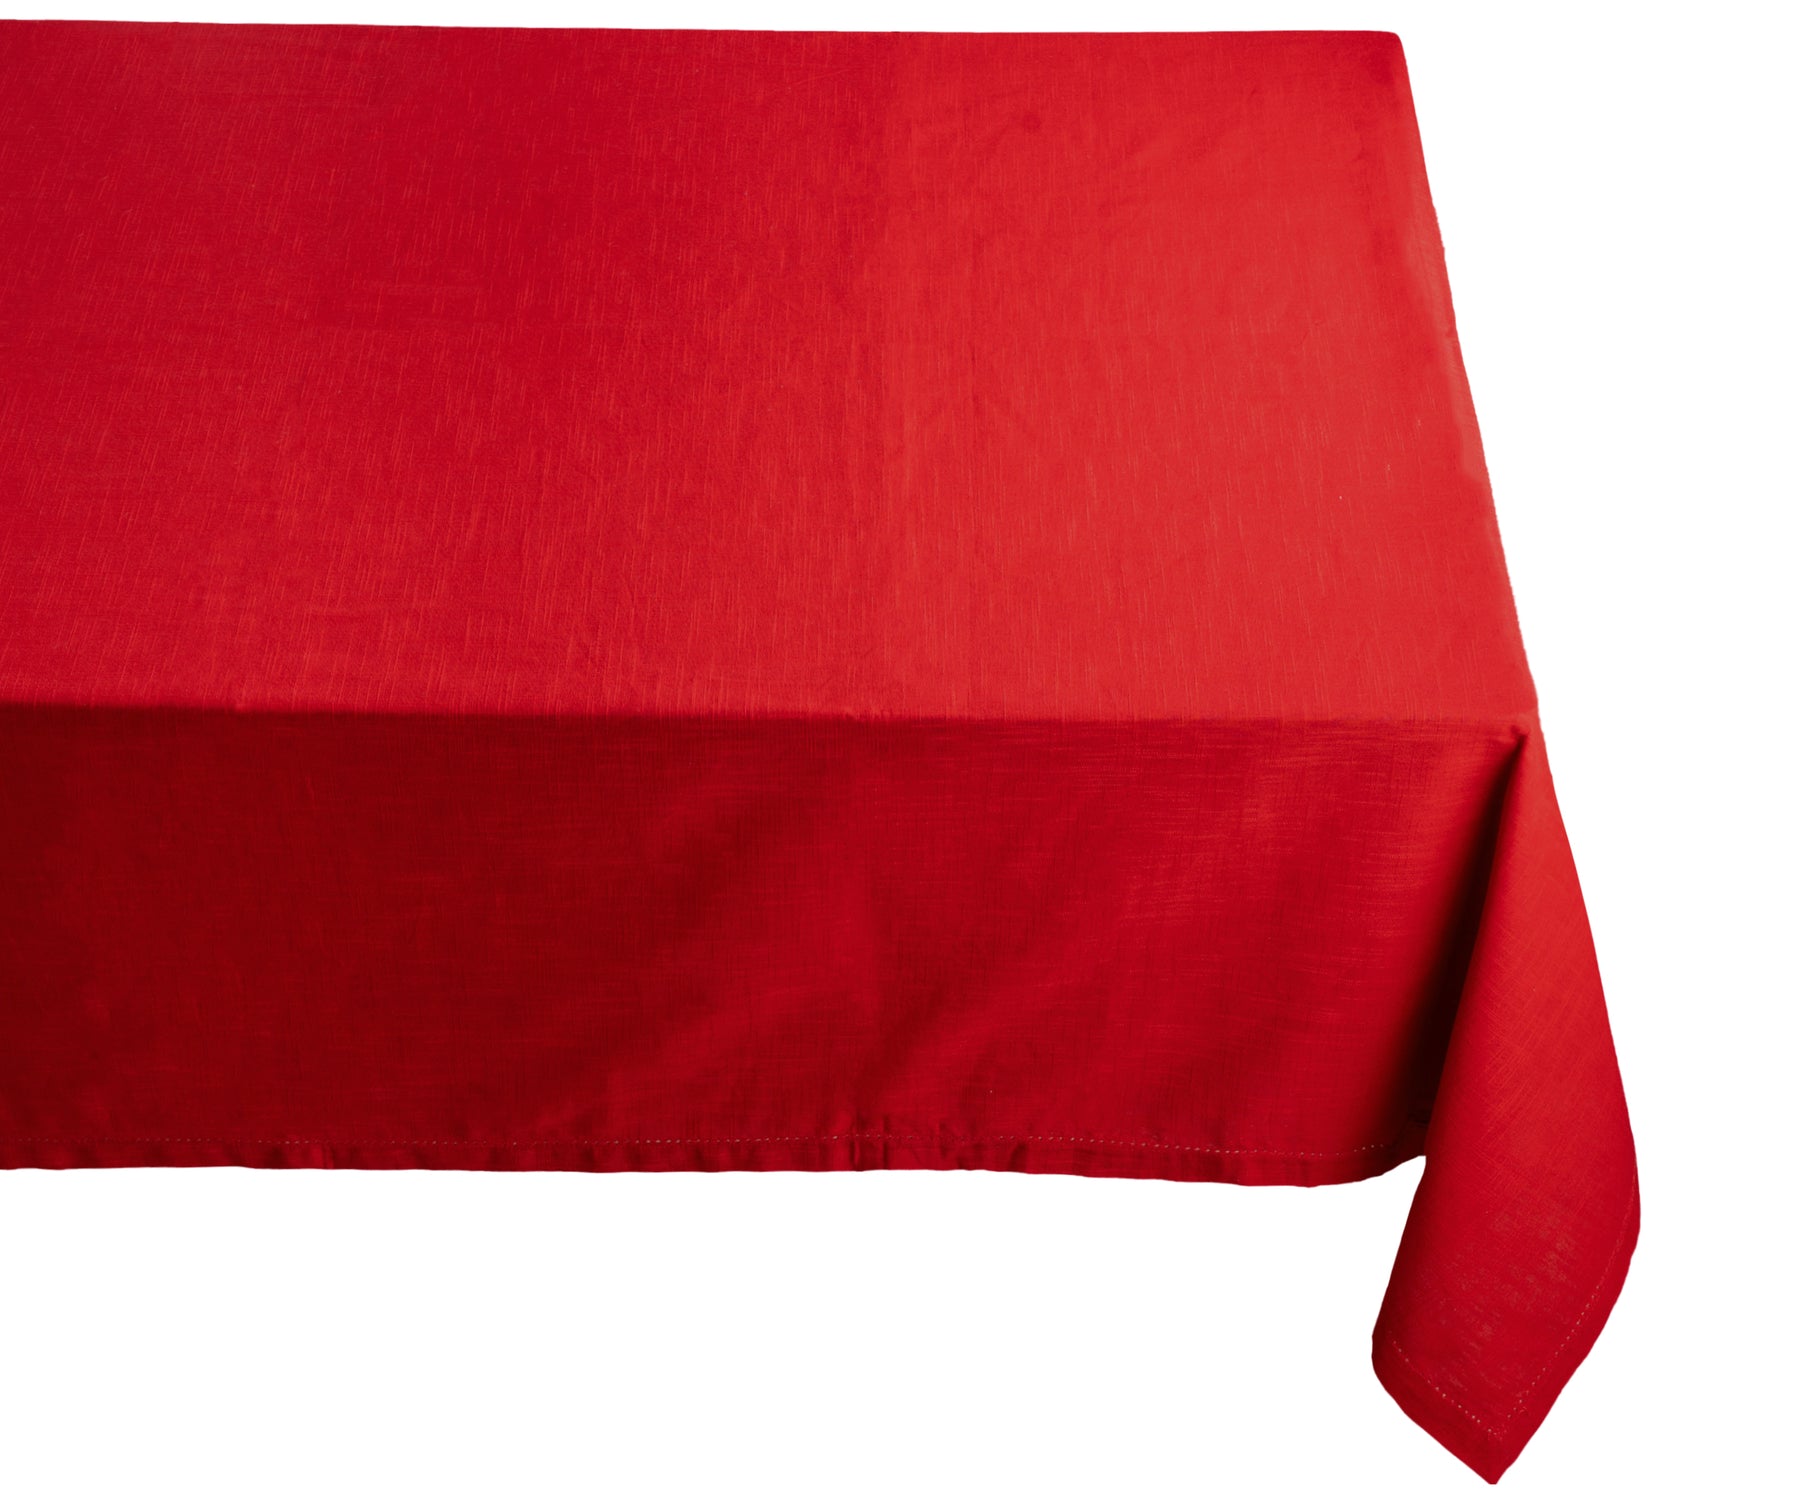 "Enrich settings with red, elevate with fabric textures, and celebrate Christmas with our diverse tablecloth assortment."